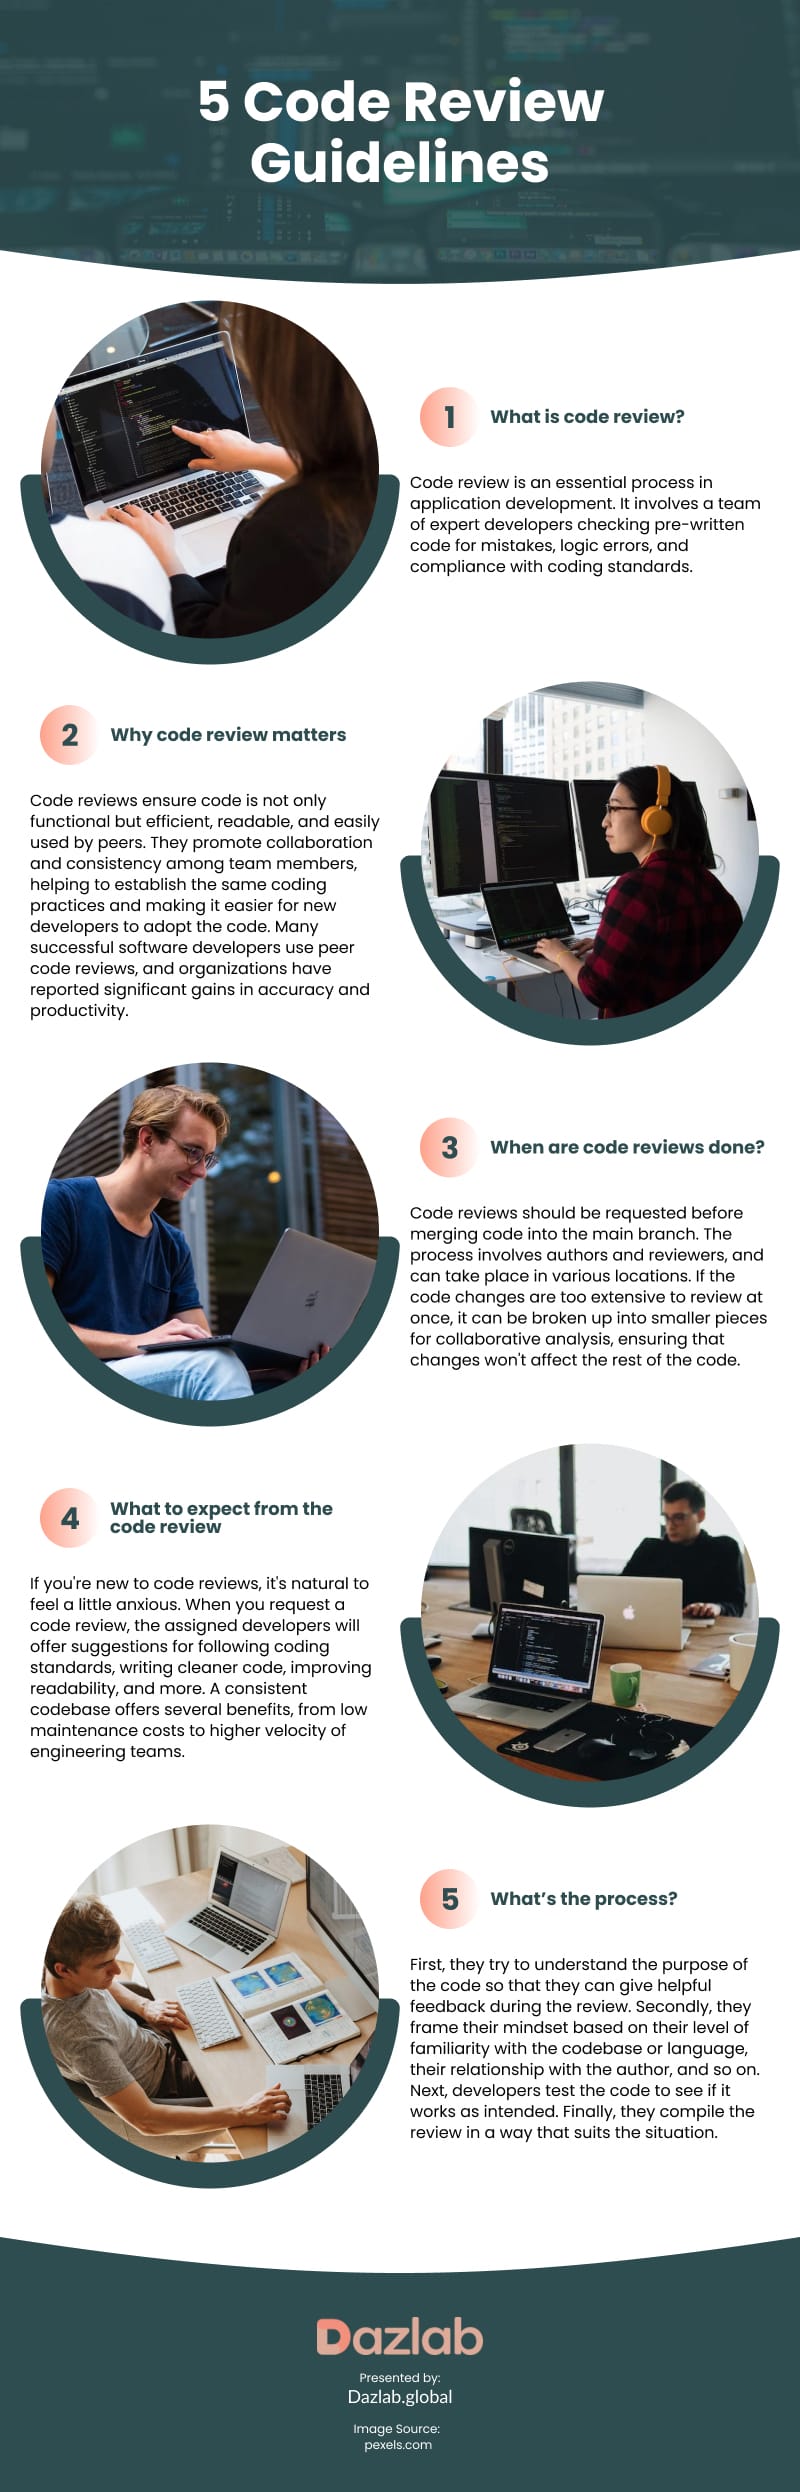 5 Code Review Guidelines Infographic